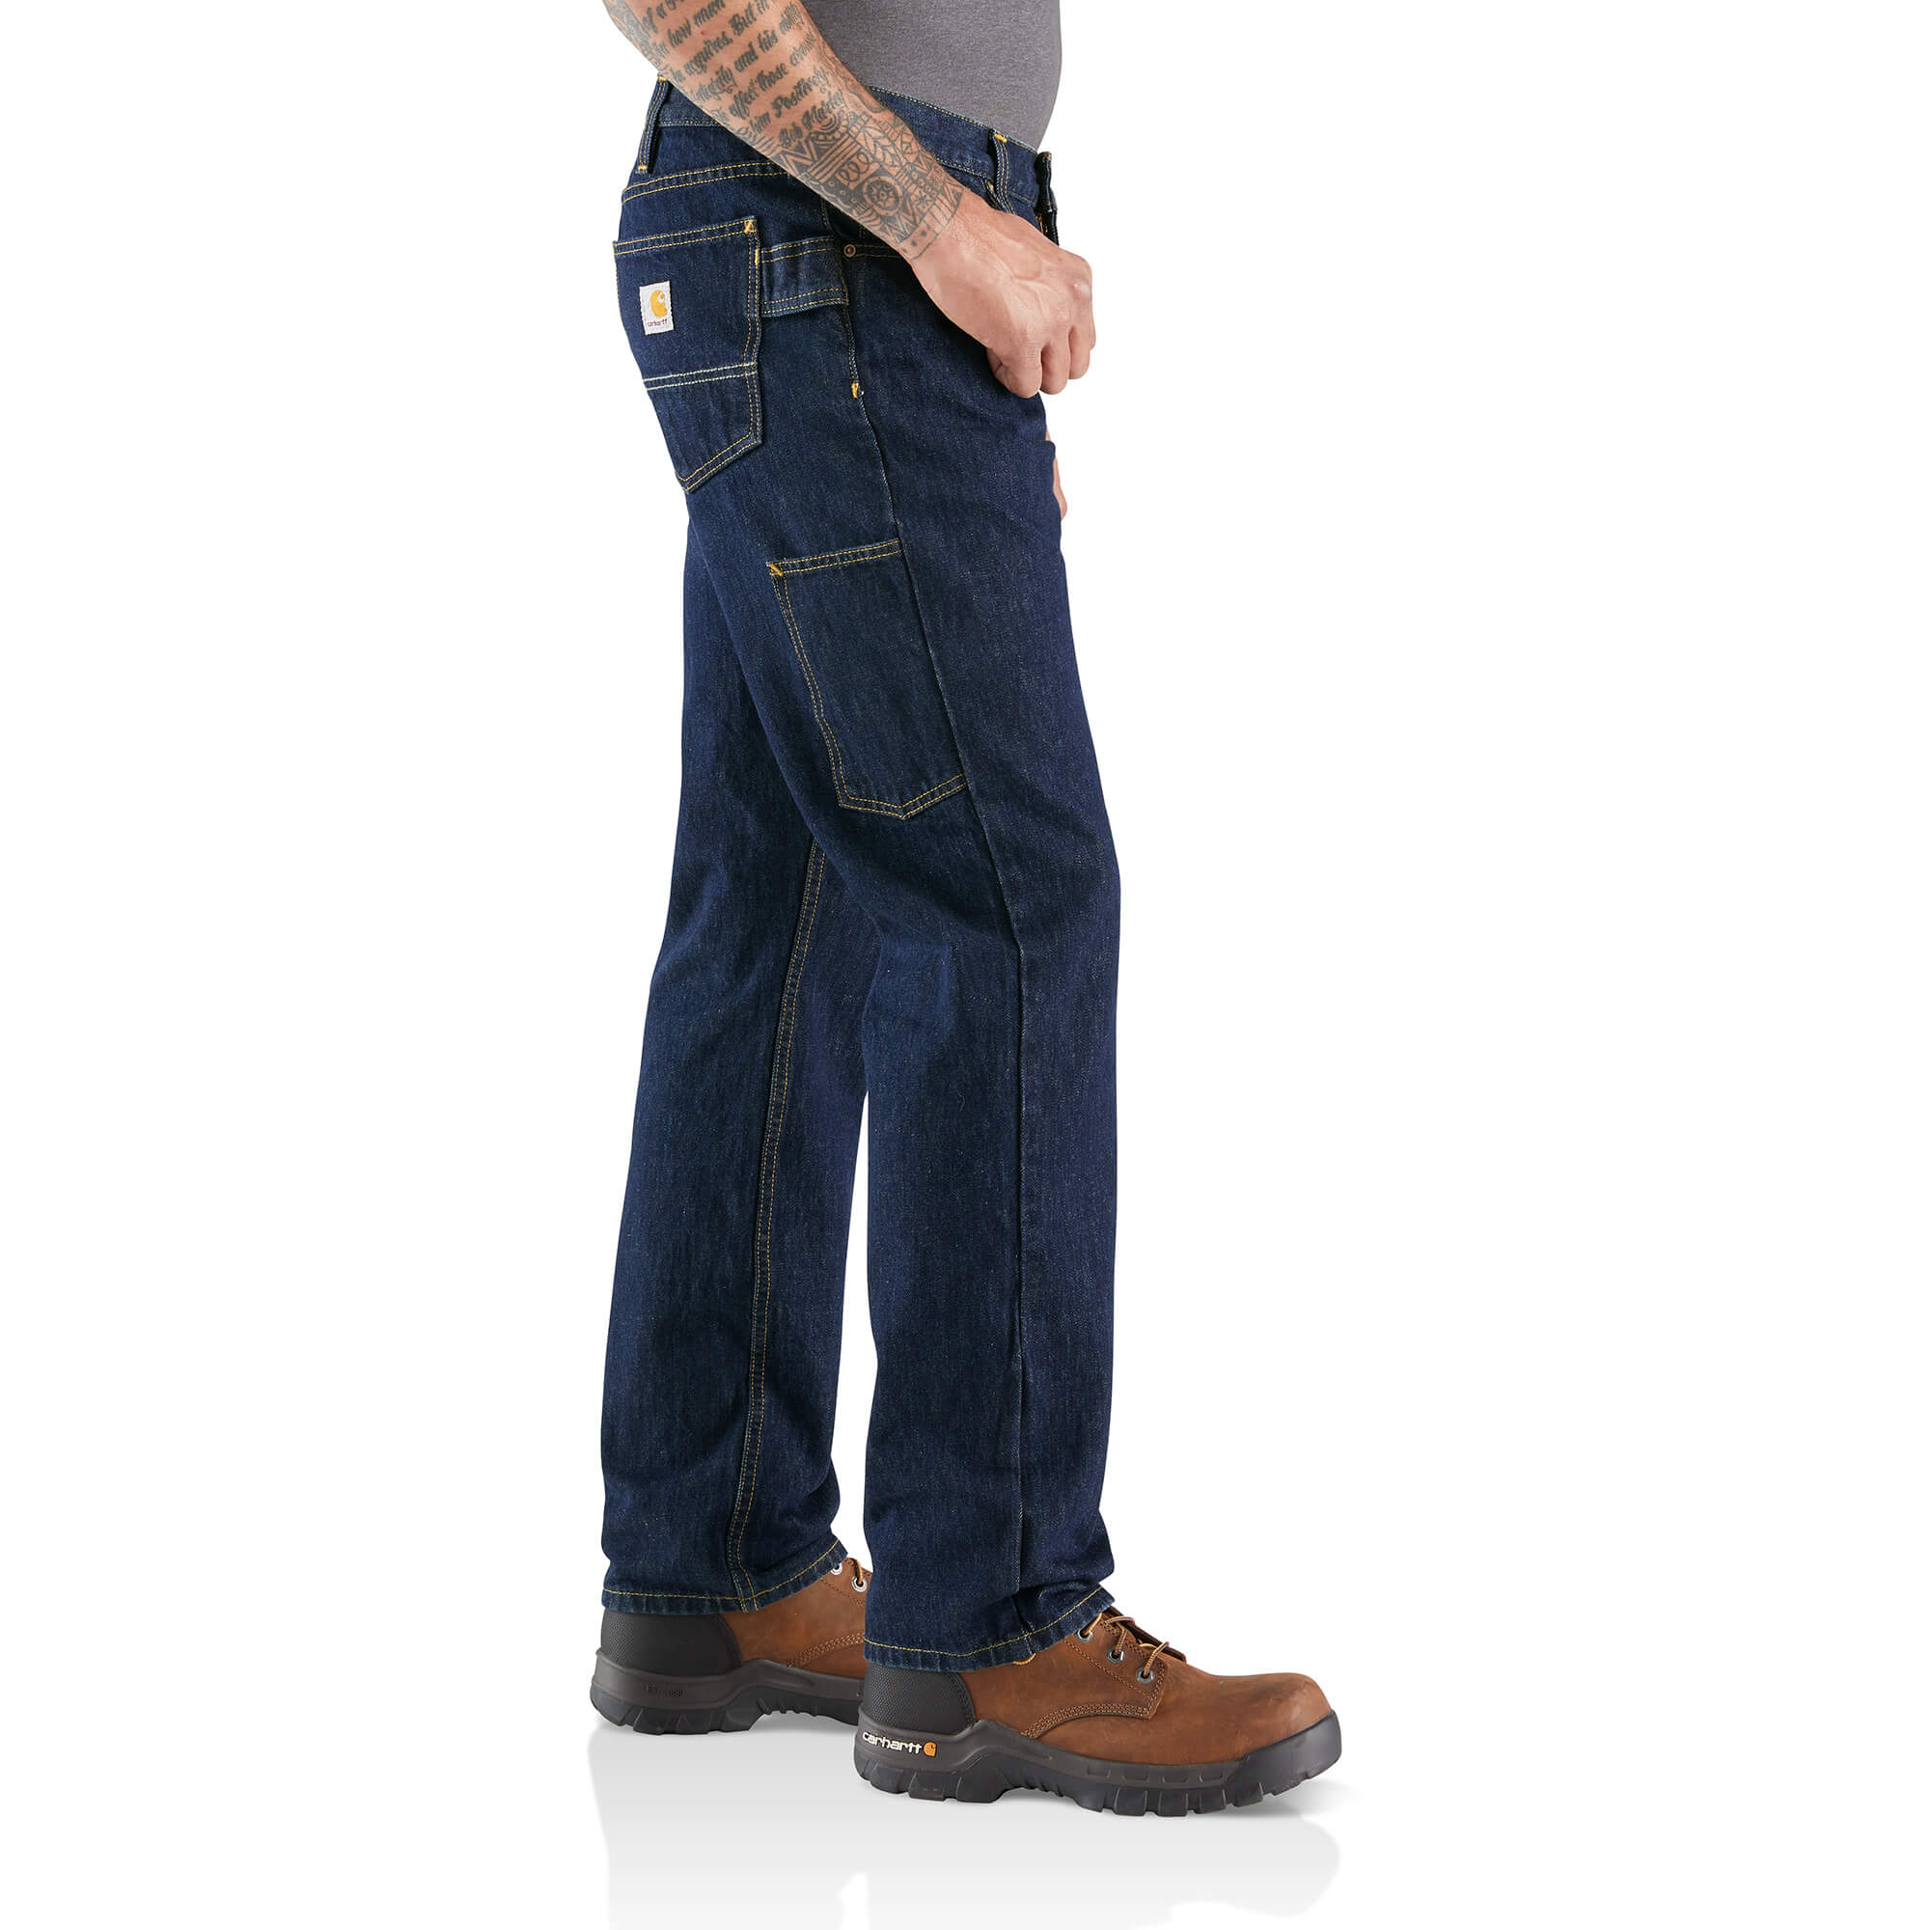 Carhartt 103889 - Rugged Flex Relaxed Fit Utility Five Pocket Jean